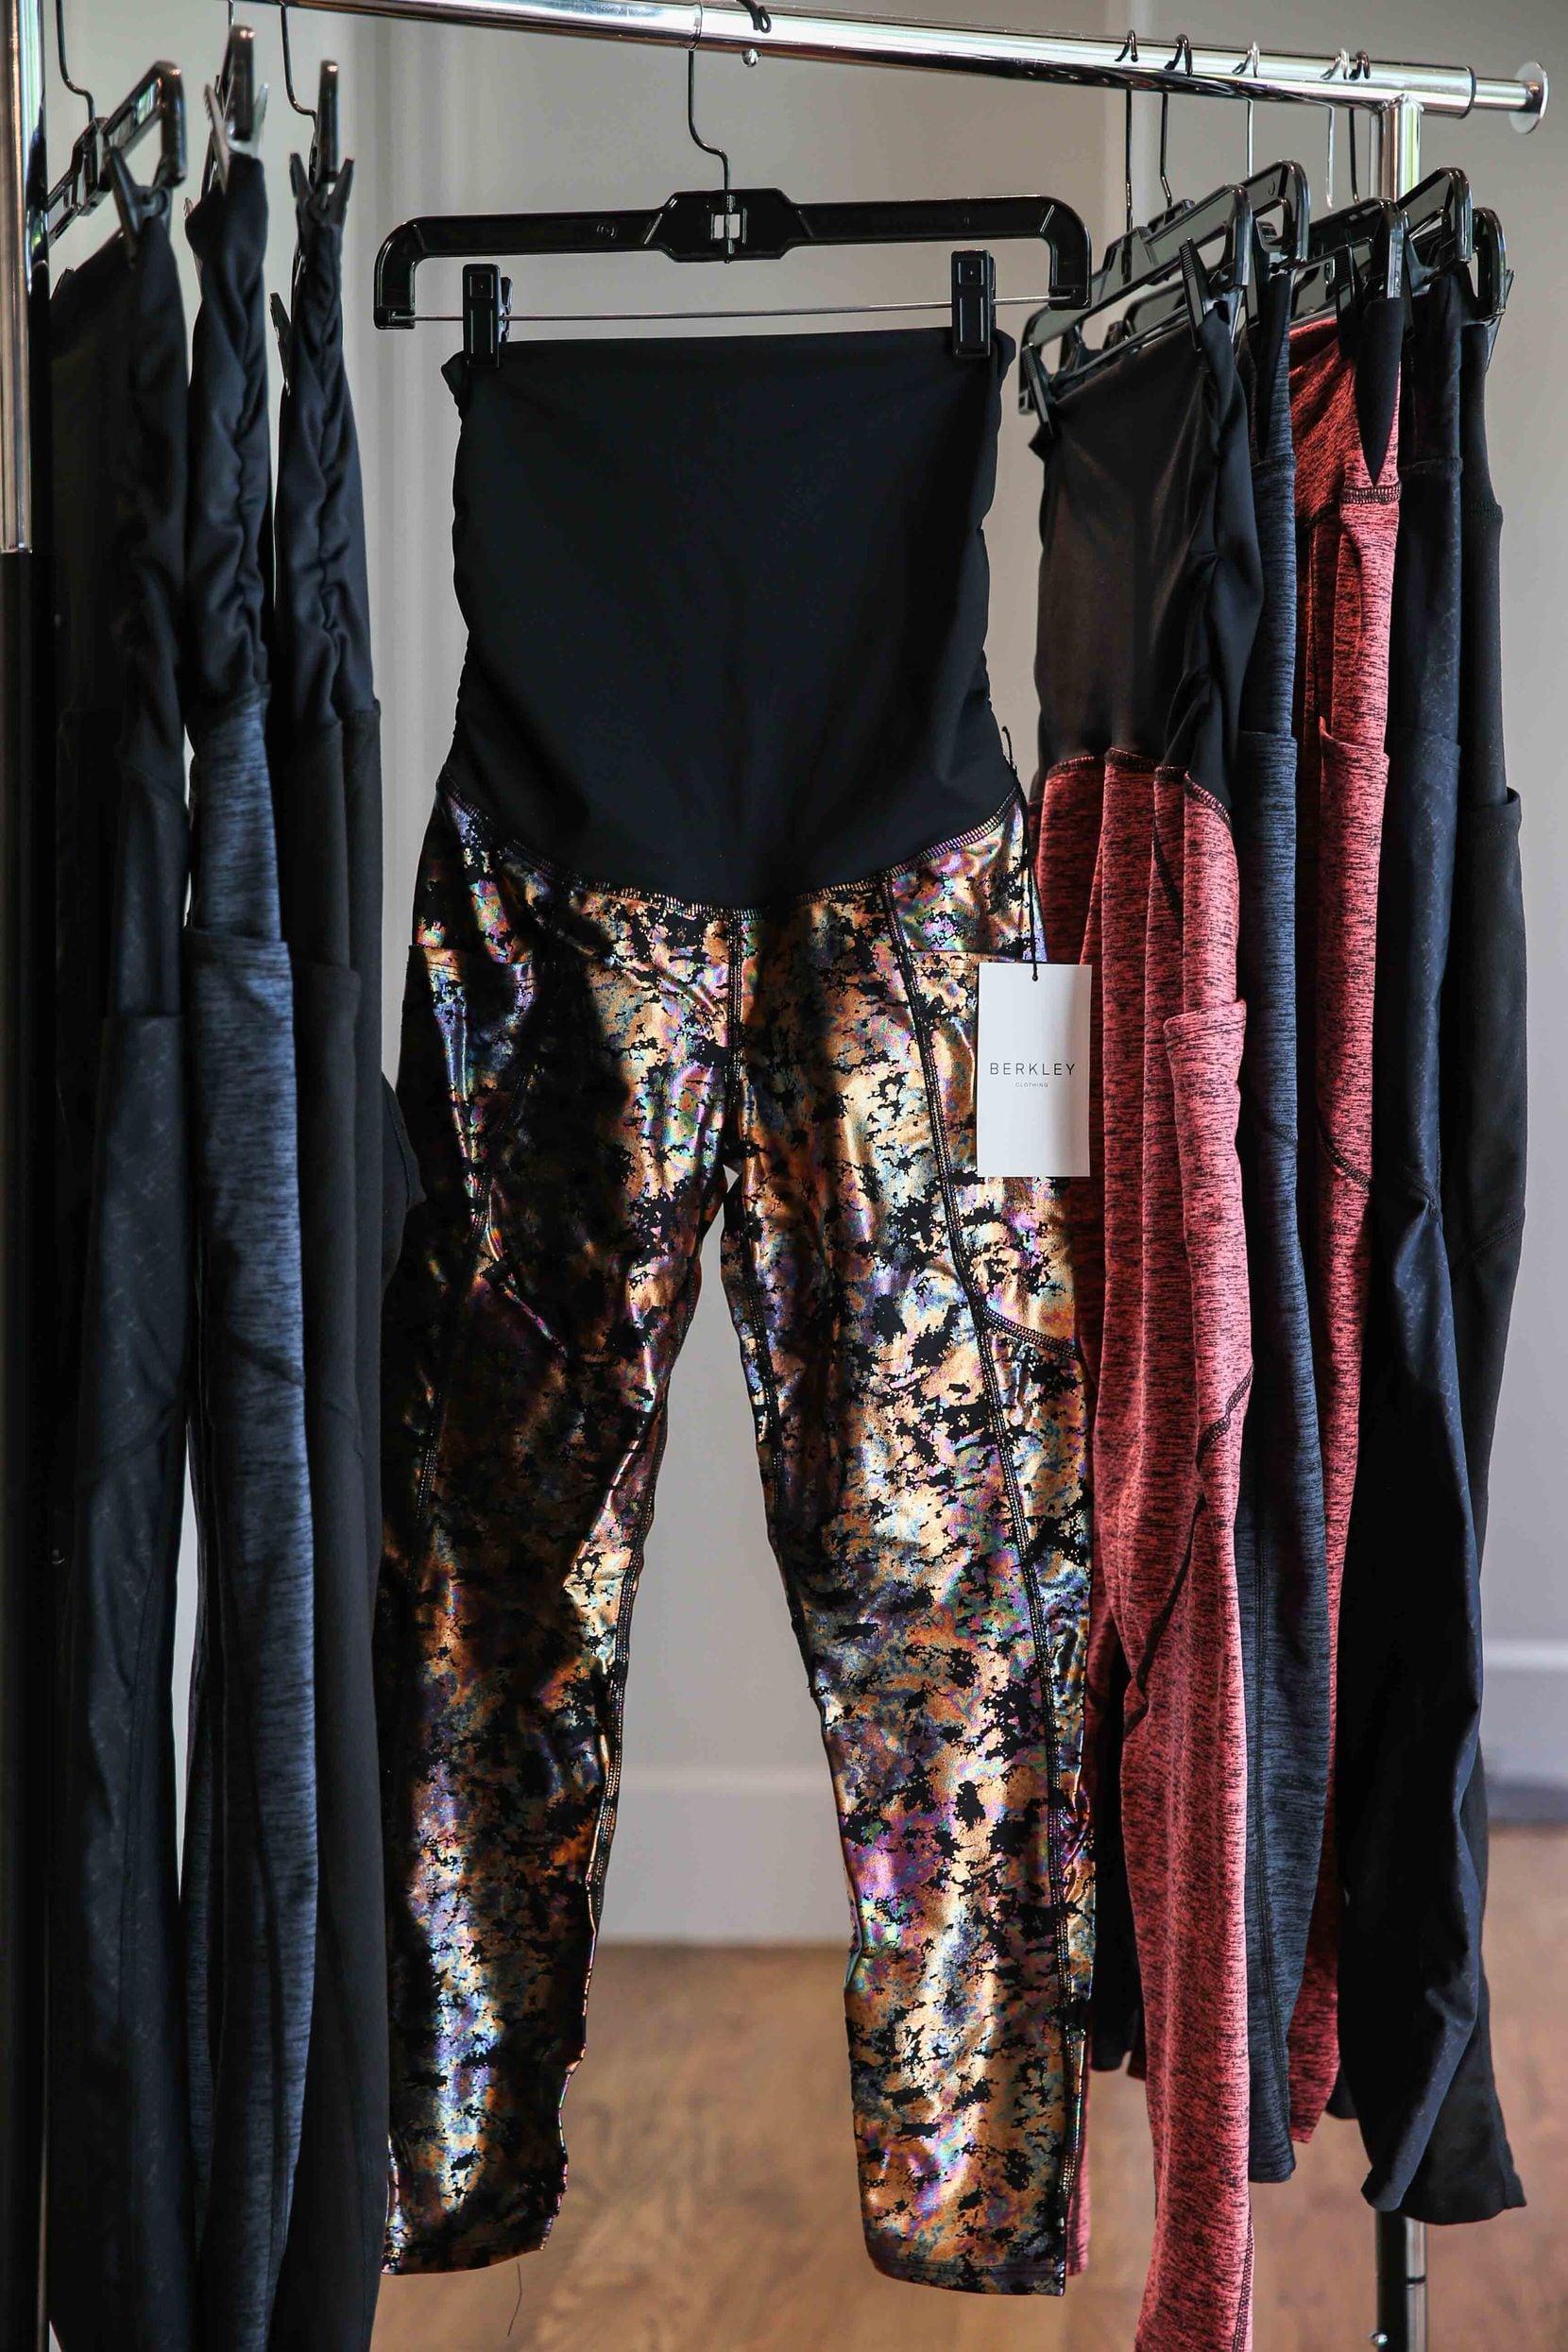 Berkley Clothing sells two styles of leggings designed to be worn throughout pregnancy. Both...